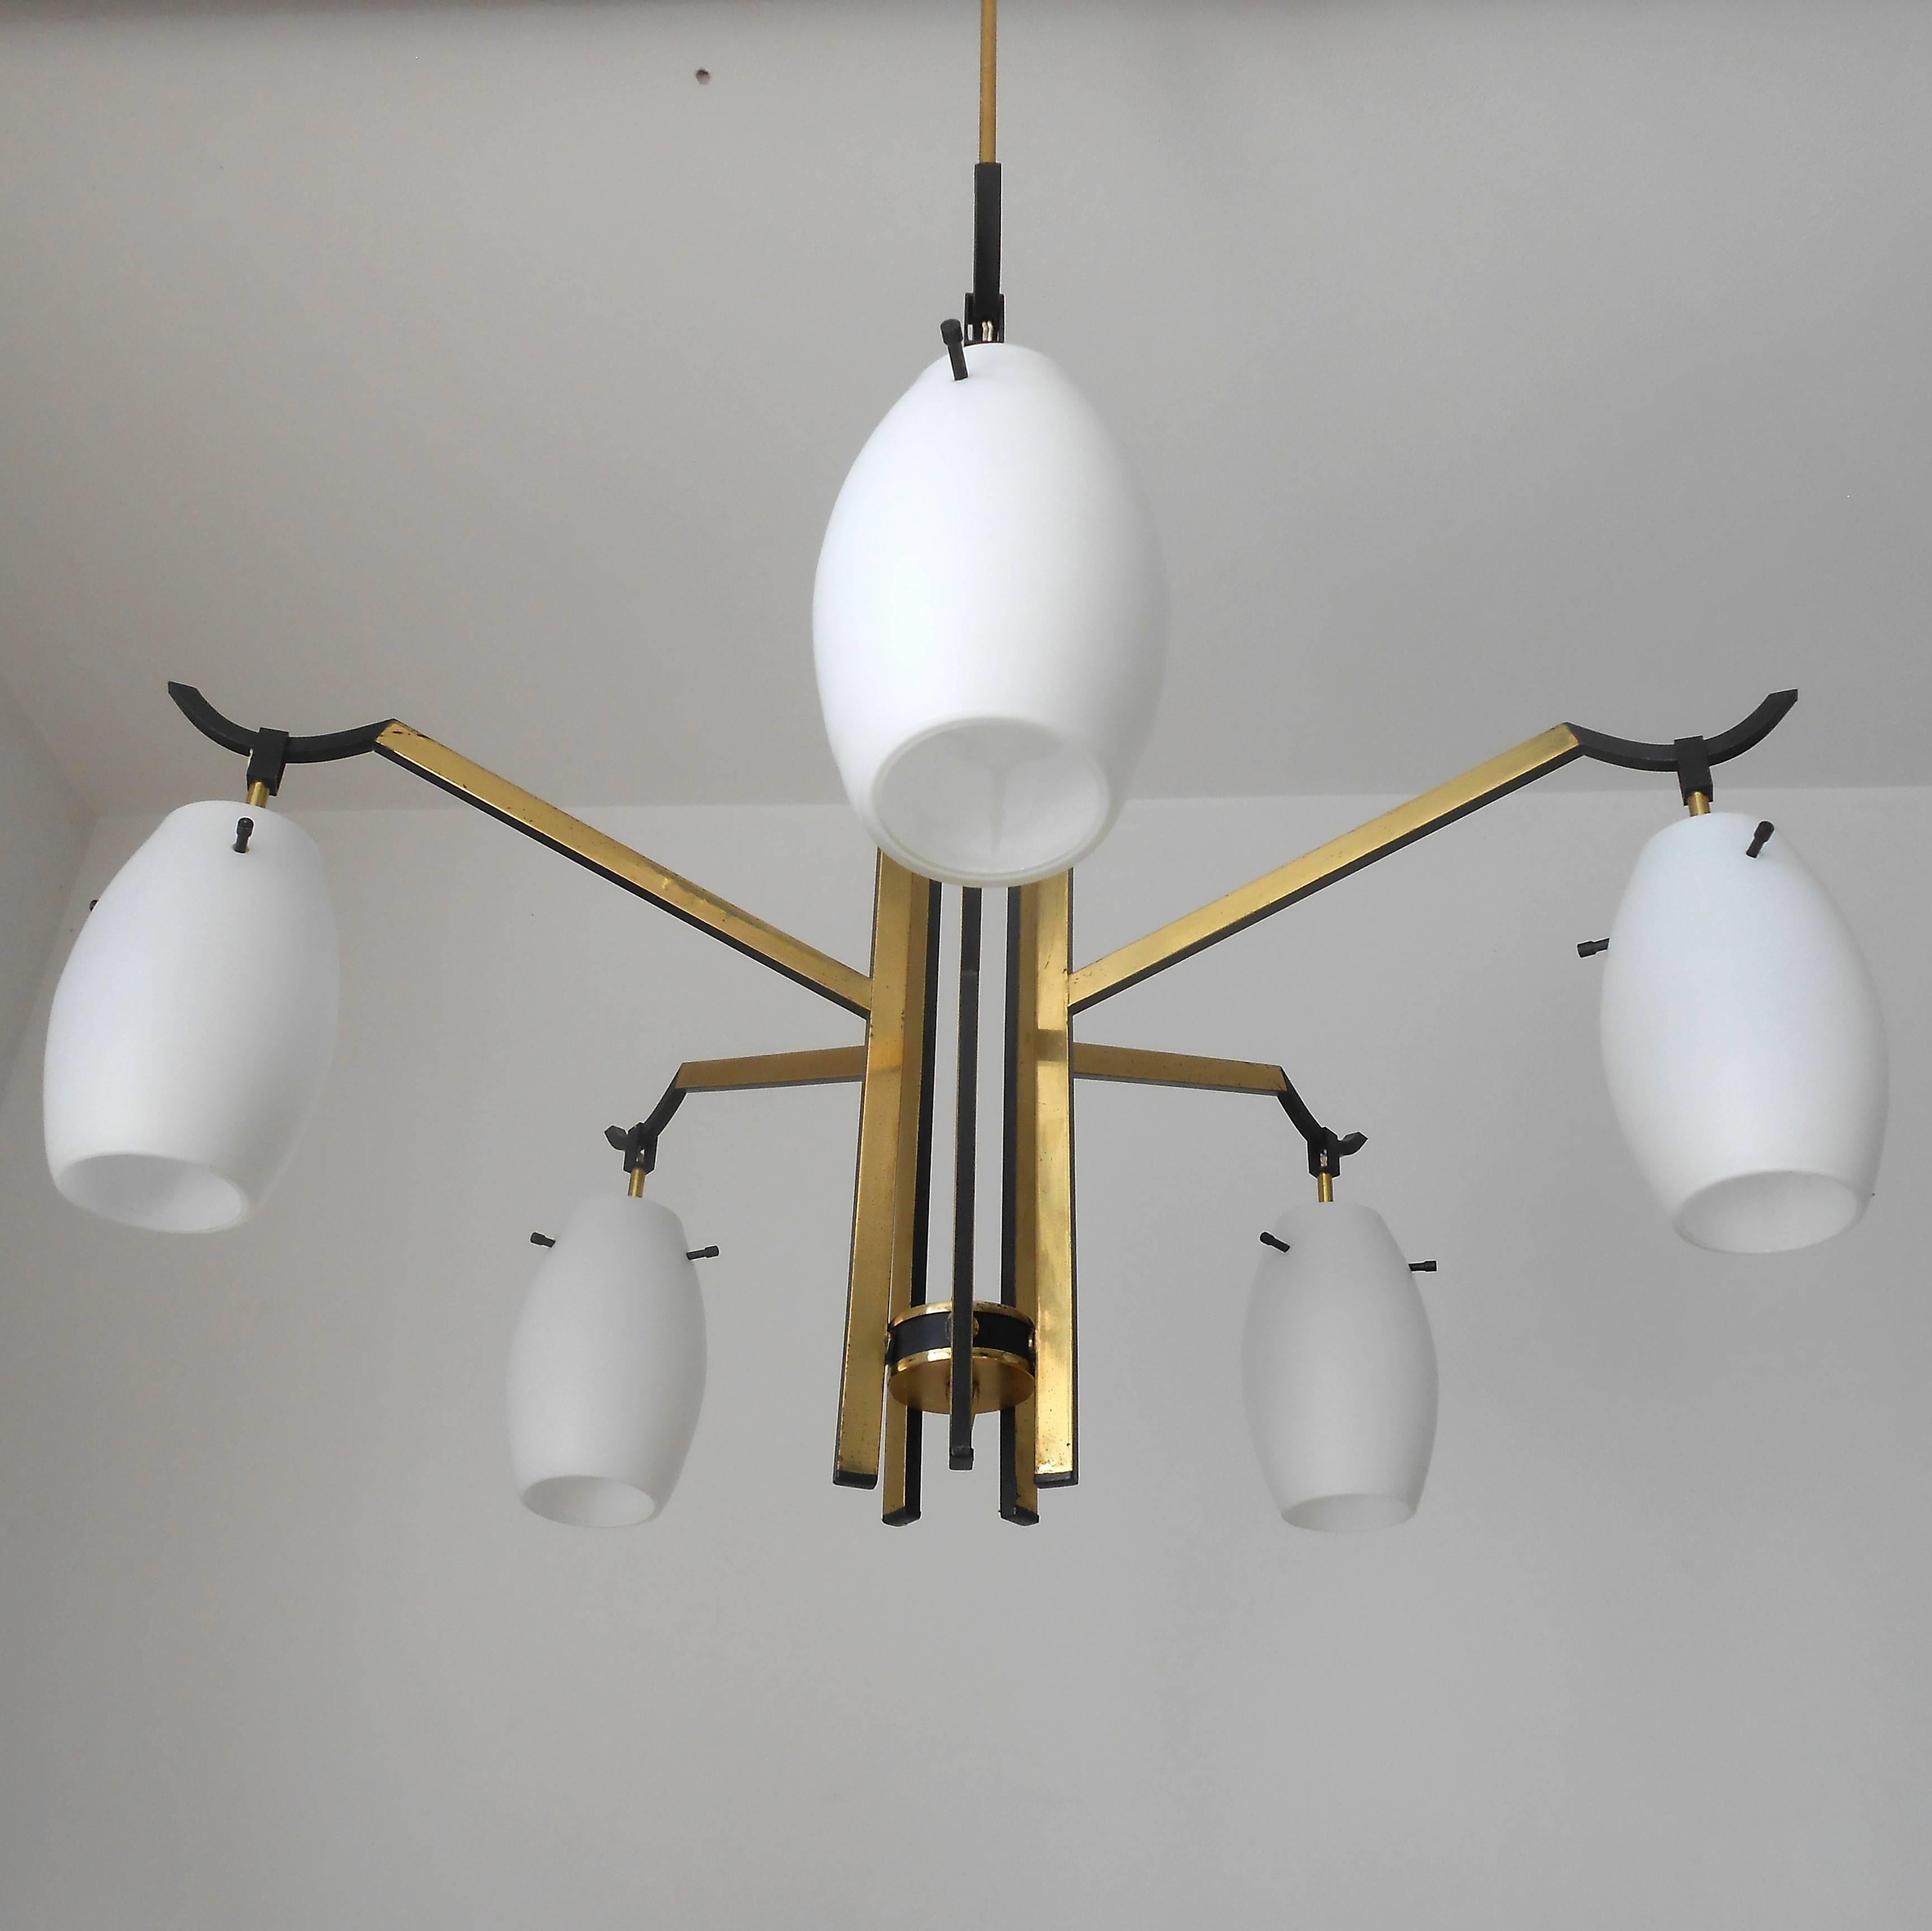 Vintage Italian chandelier or pendant with five matte white Murano glass shades on brass frame, by Stilnovo. Made in Italy in the 1950's.
5 lights / max 40W each
Diameter: 27 inches / Height: 43.5 inches
1 in stock in Palm Springs currently ON SALE